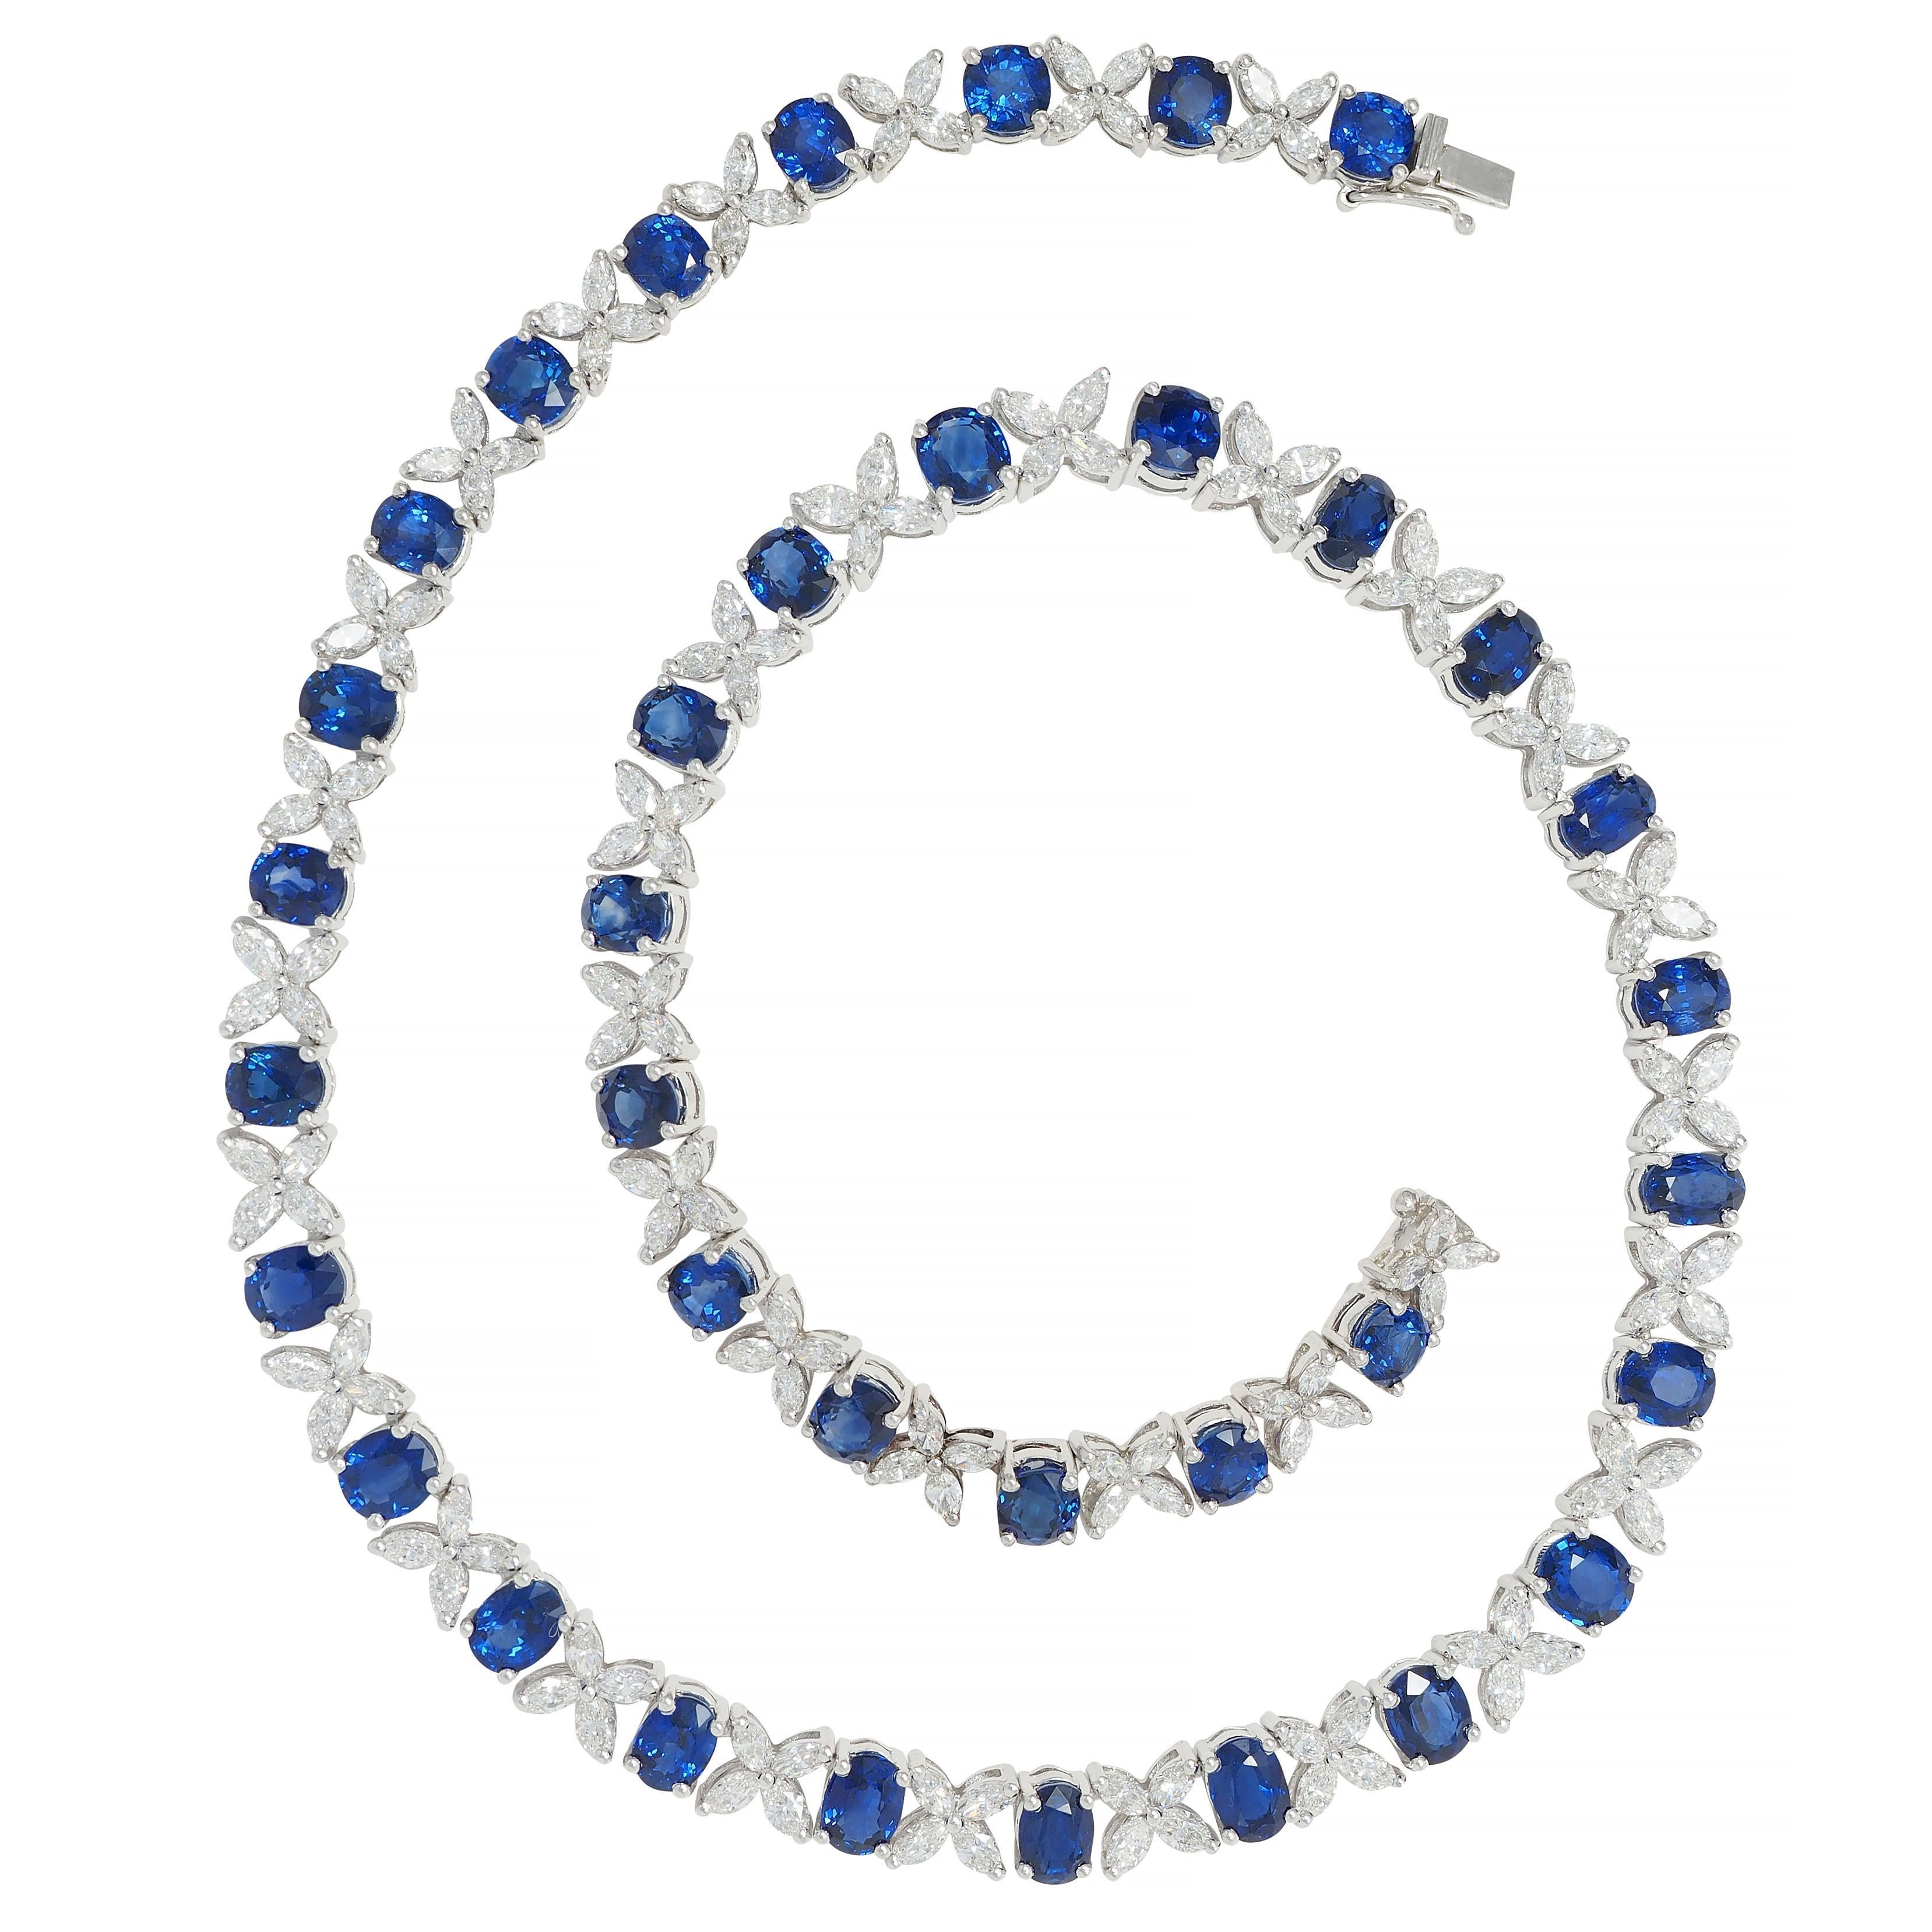 Comprised of hinged basket links featuring cushion cut sapphires prong set throughout
Weighing approximately 30.96 carats total - transparent medium blue in color
Alternating with clusters of marquise cut diamonds prong set as floral motif
Weighing